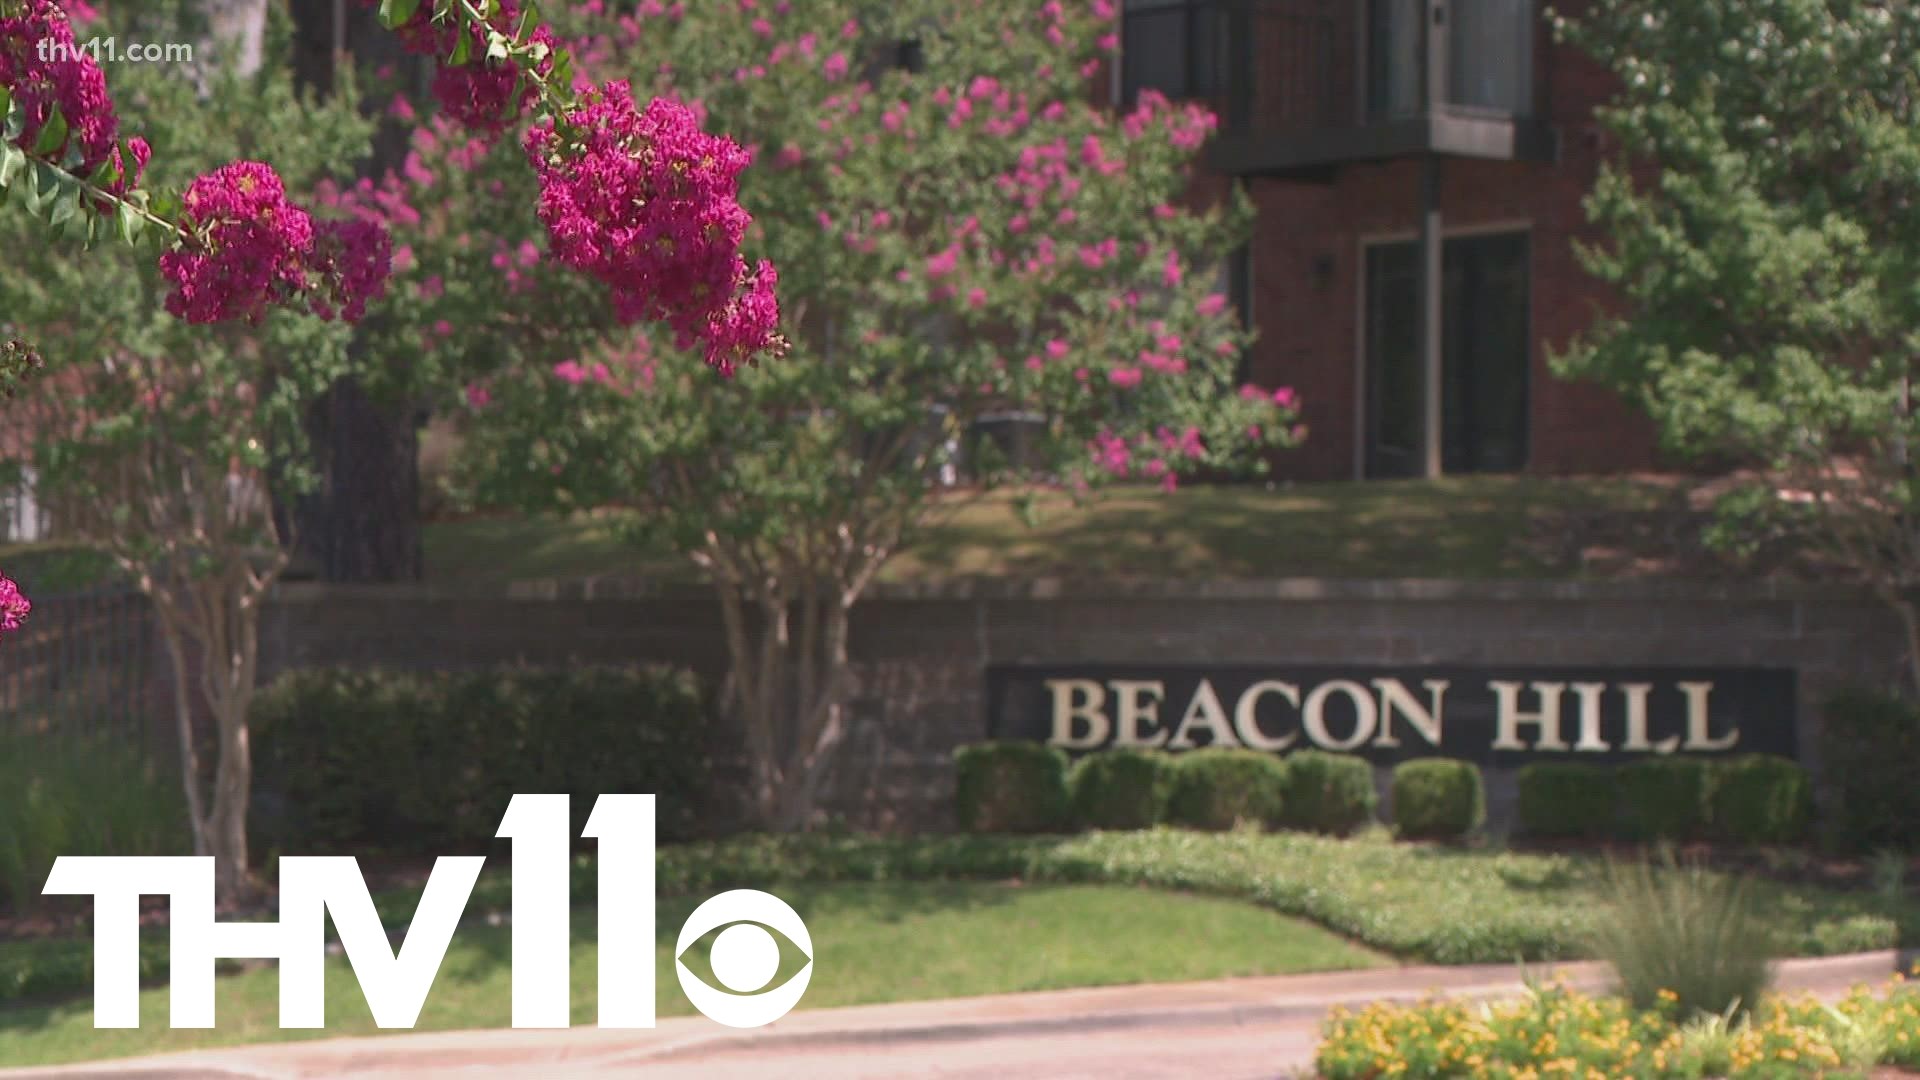 Little Rock police have now upgraded a deadly night at the Beacon Hill Apartments to a double homicide.